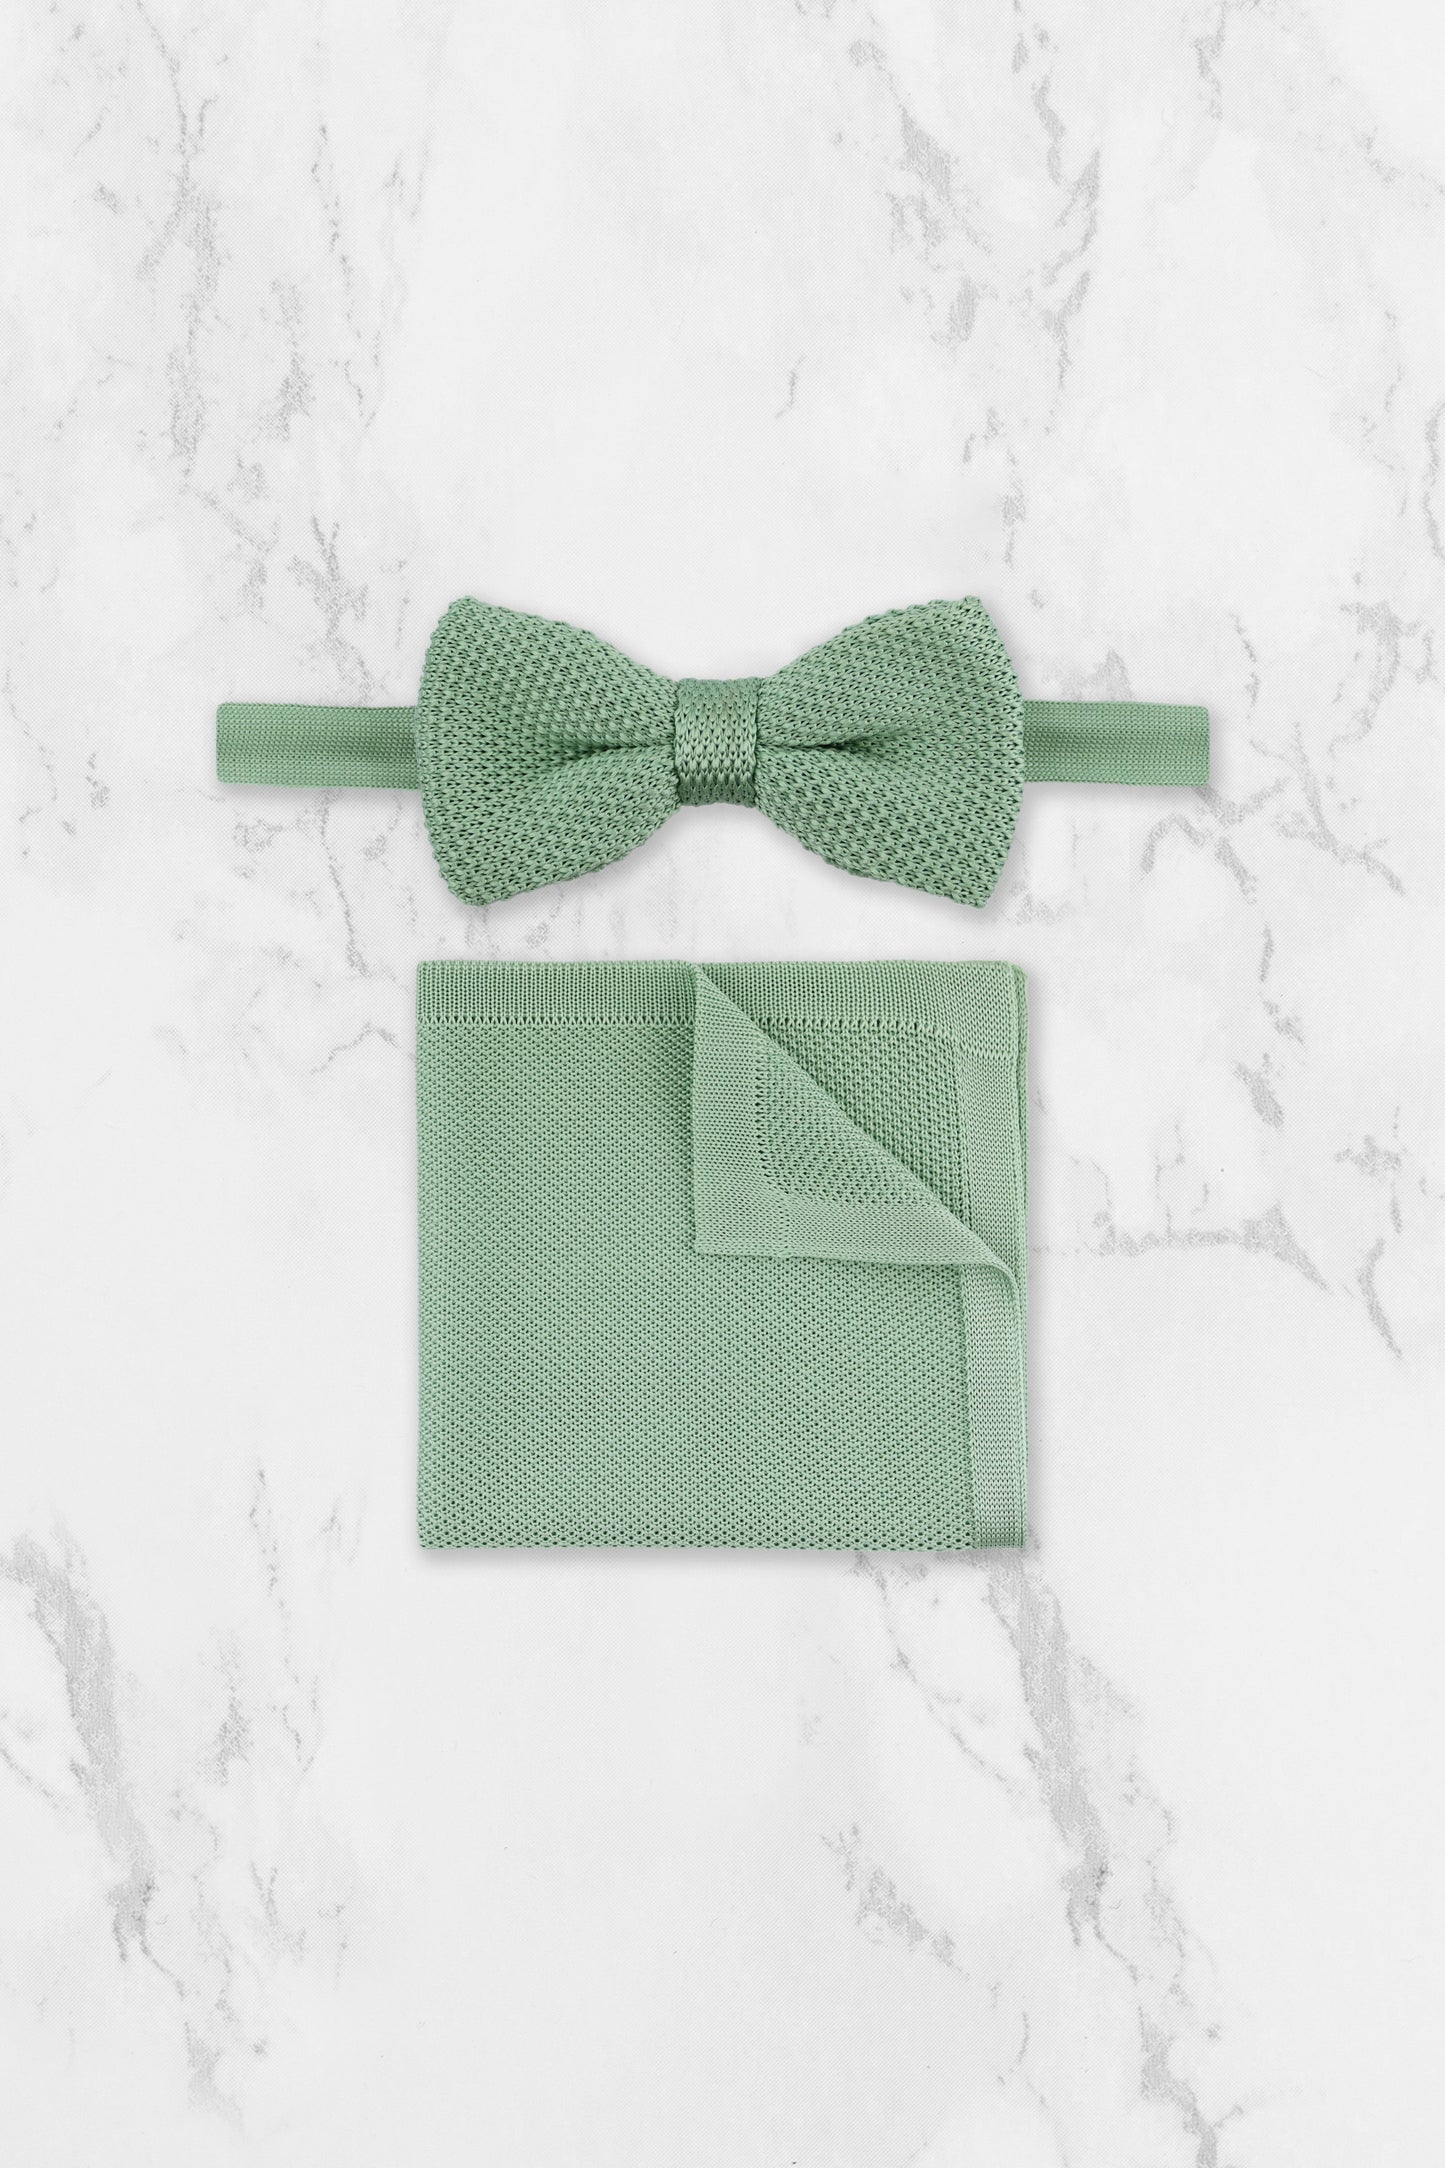 100% Polyester Knitted Pocket Square - Sage Green